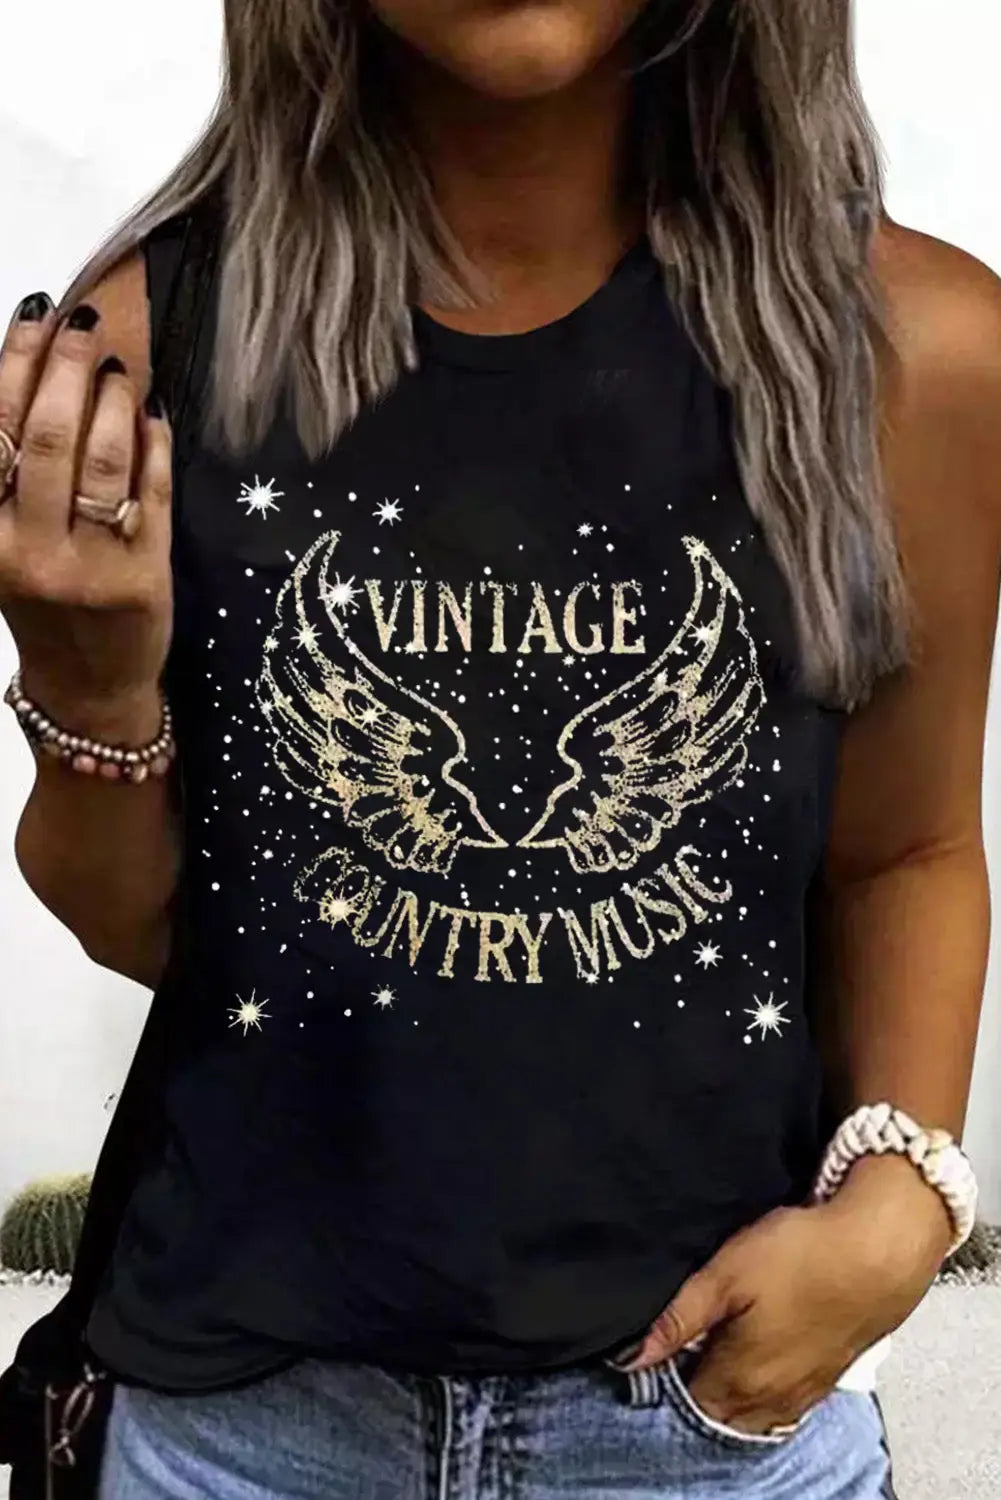 Black vintage country music wing glitter print tank top - s / 65% polyester + 30% viscose + 5% elastane - tops